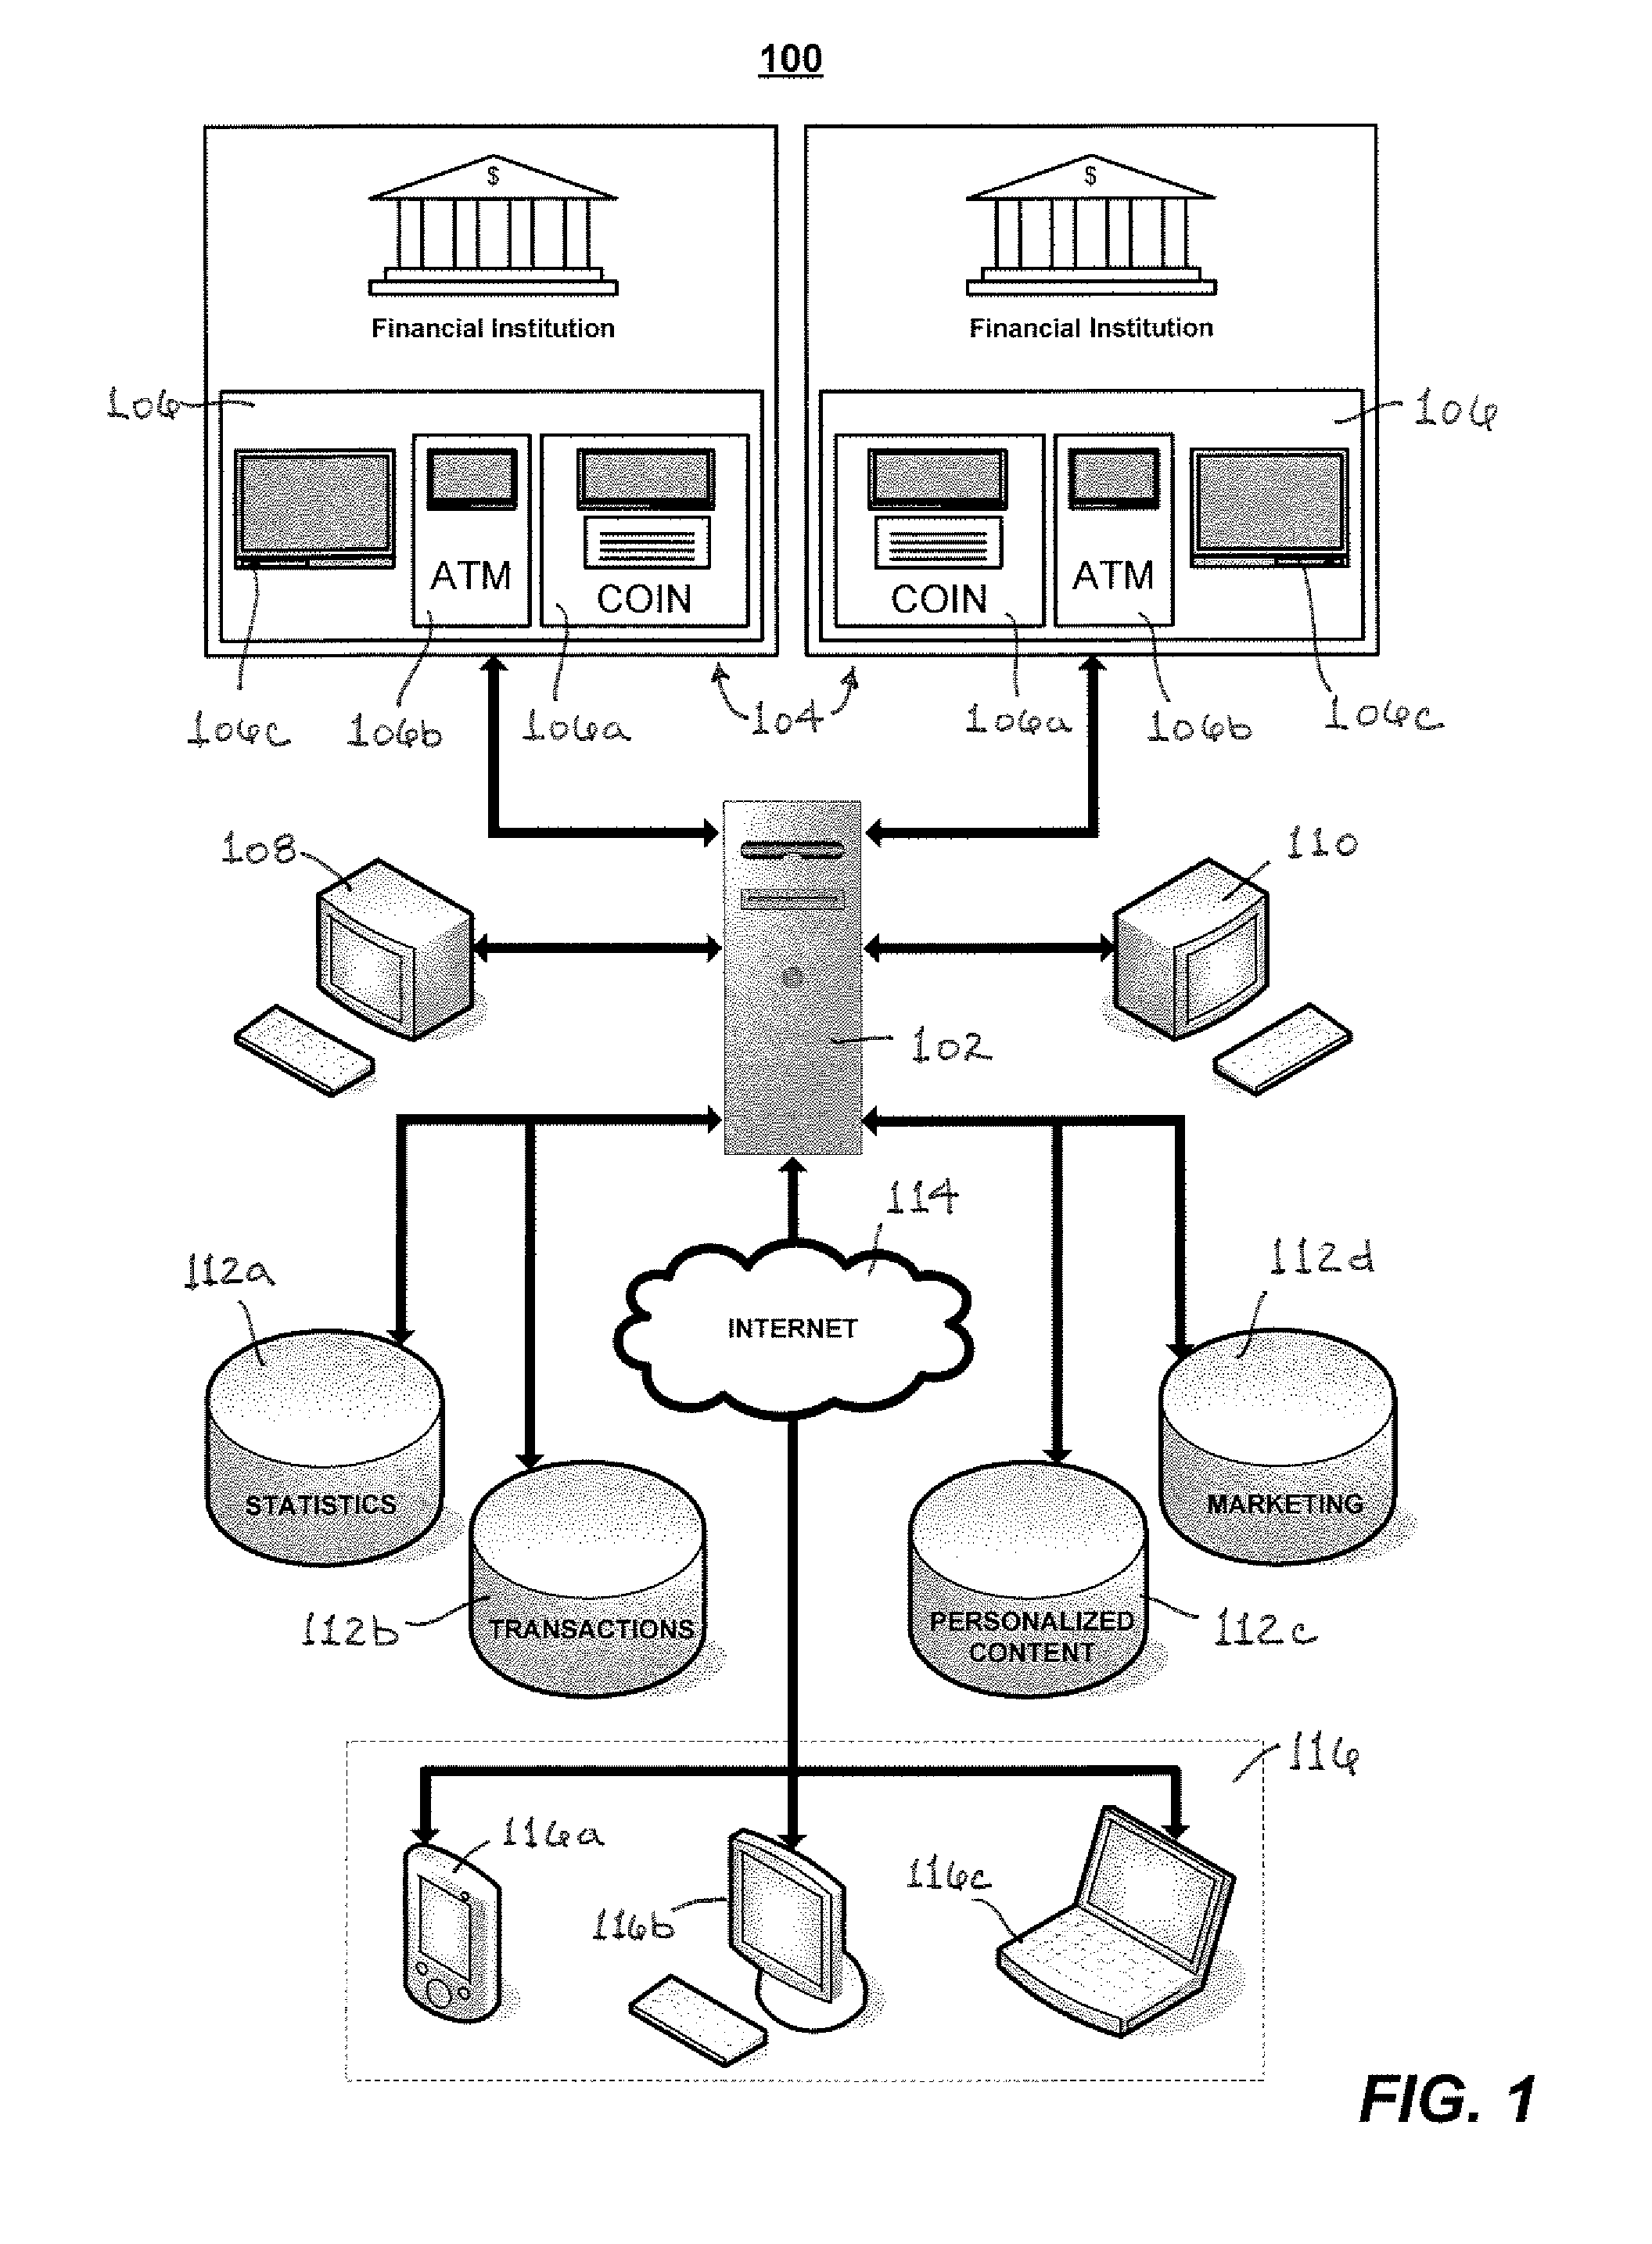 System and method for unifying e-banking touch points and providing personalized financial services